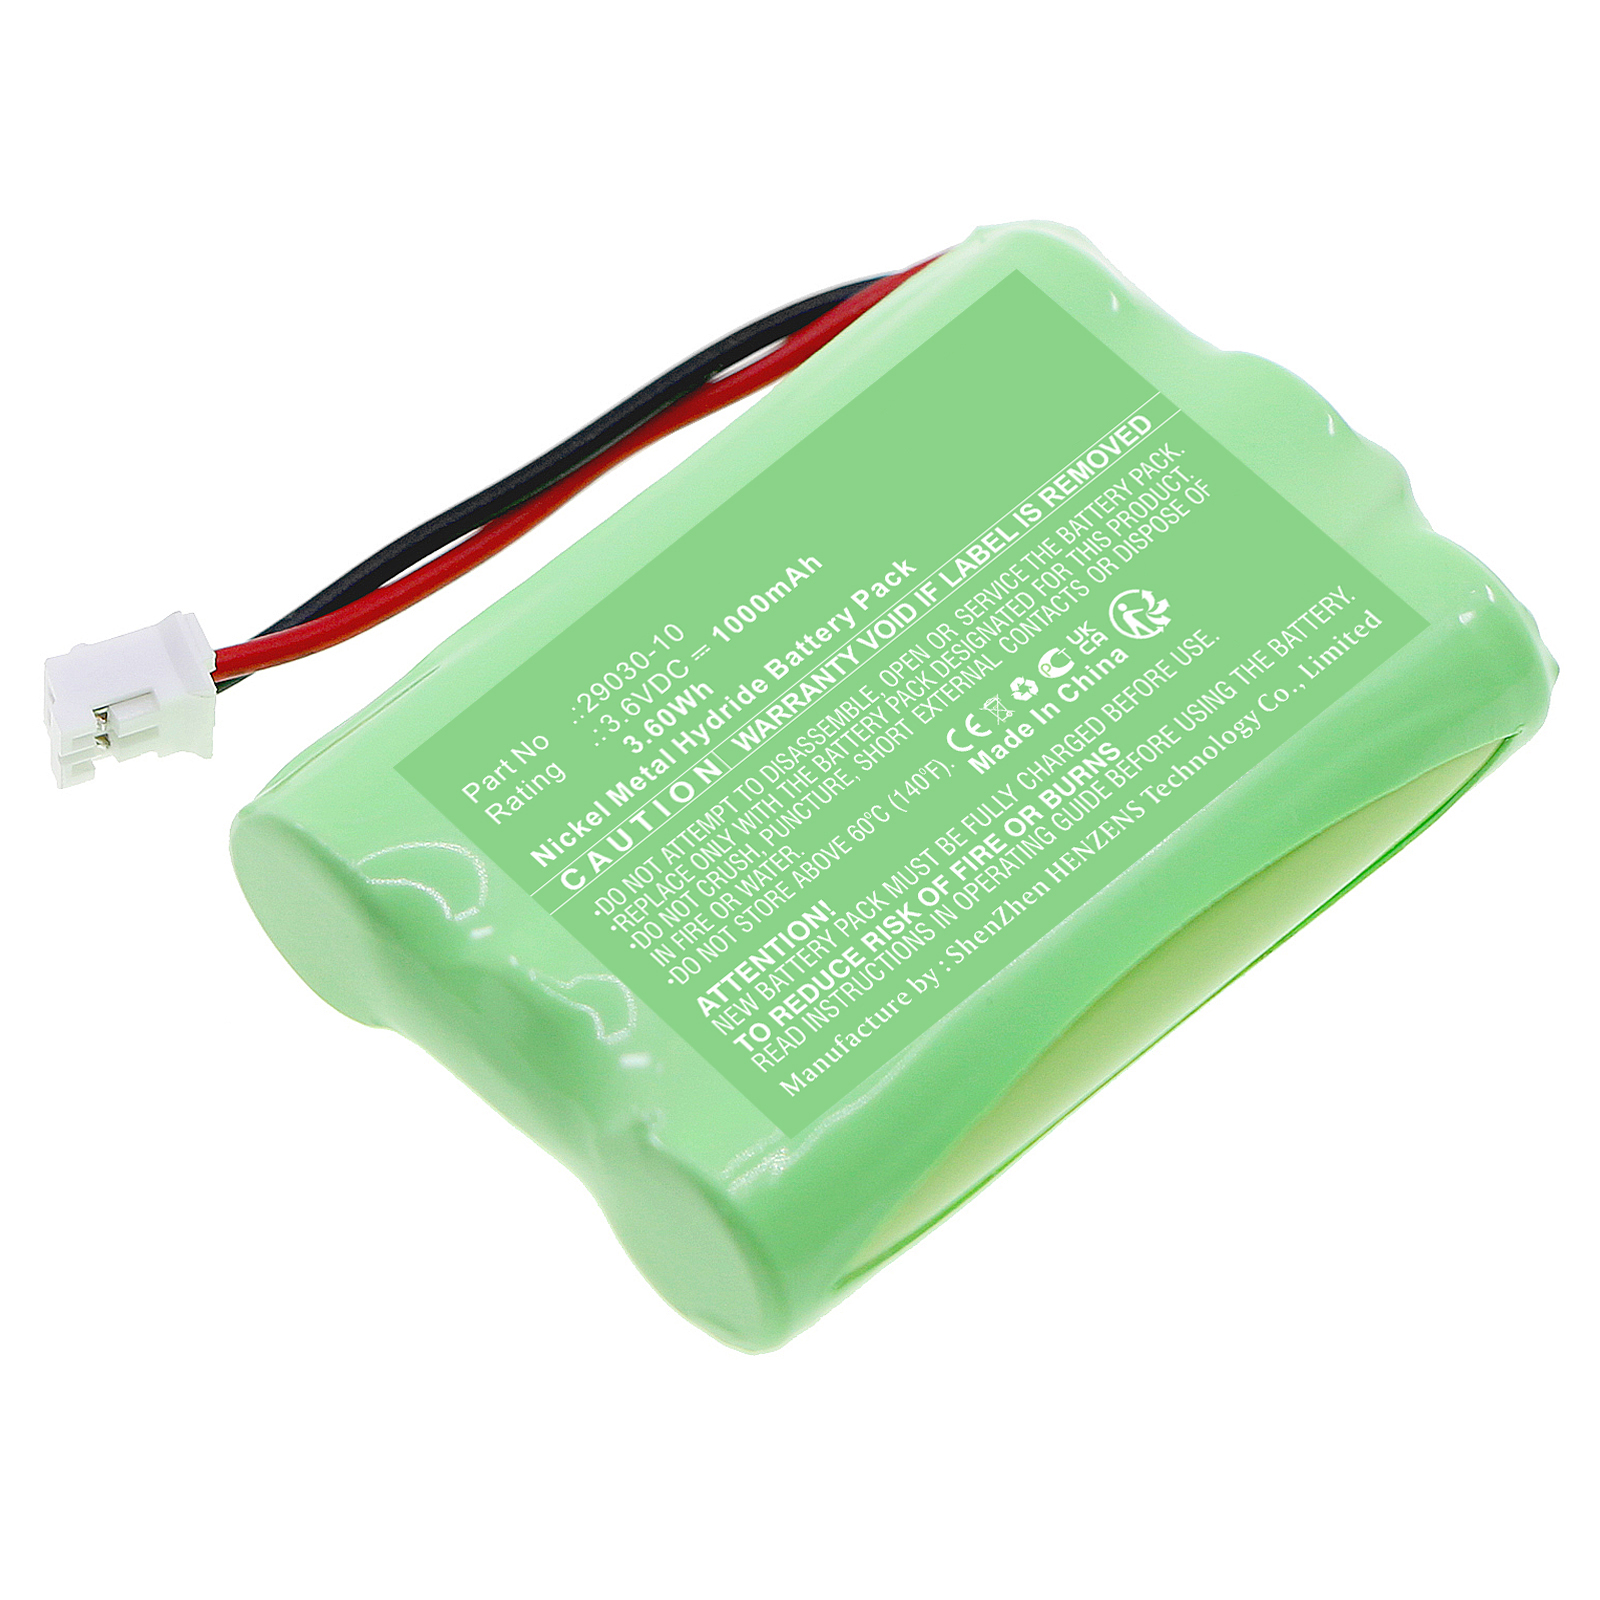 Synergy Digital Baby Monitor Battery, Compatible with Summer 29030-10 Baby Monitor Battery (Ni-MH, 3.6V, 1000mAh)